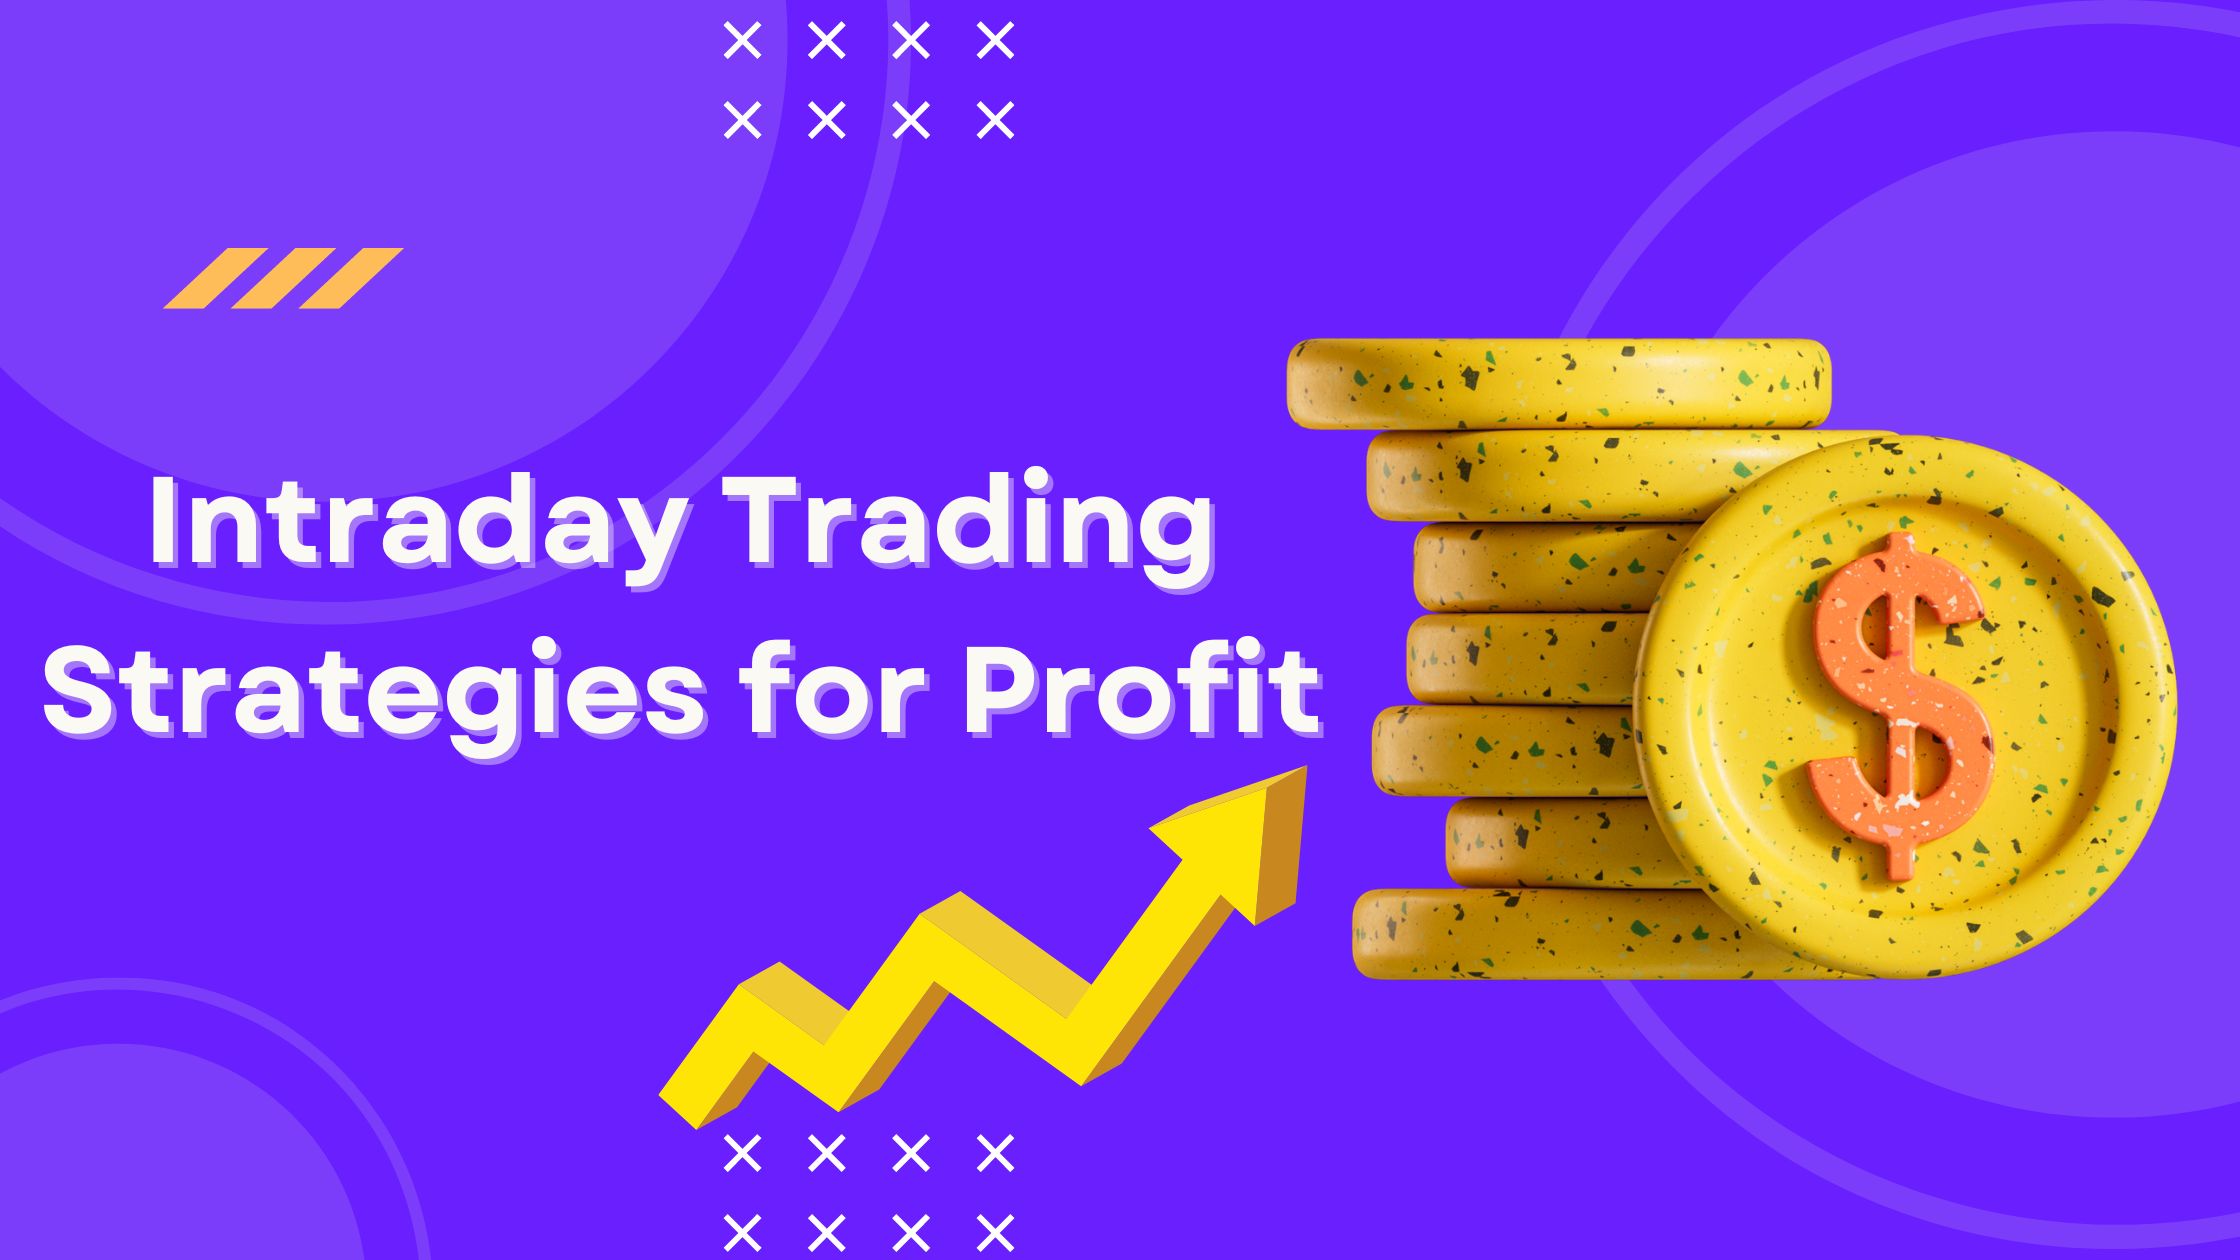 Intraday Trading Strategies for Profit